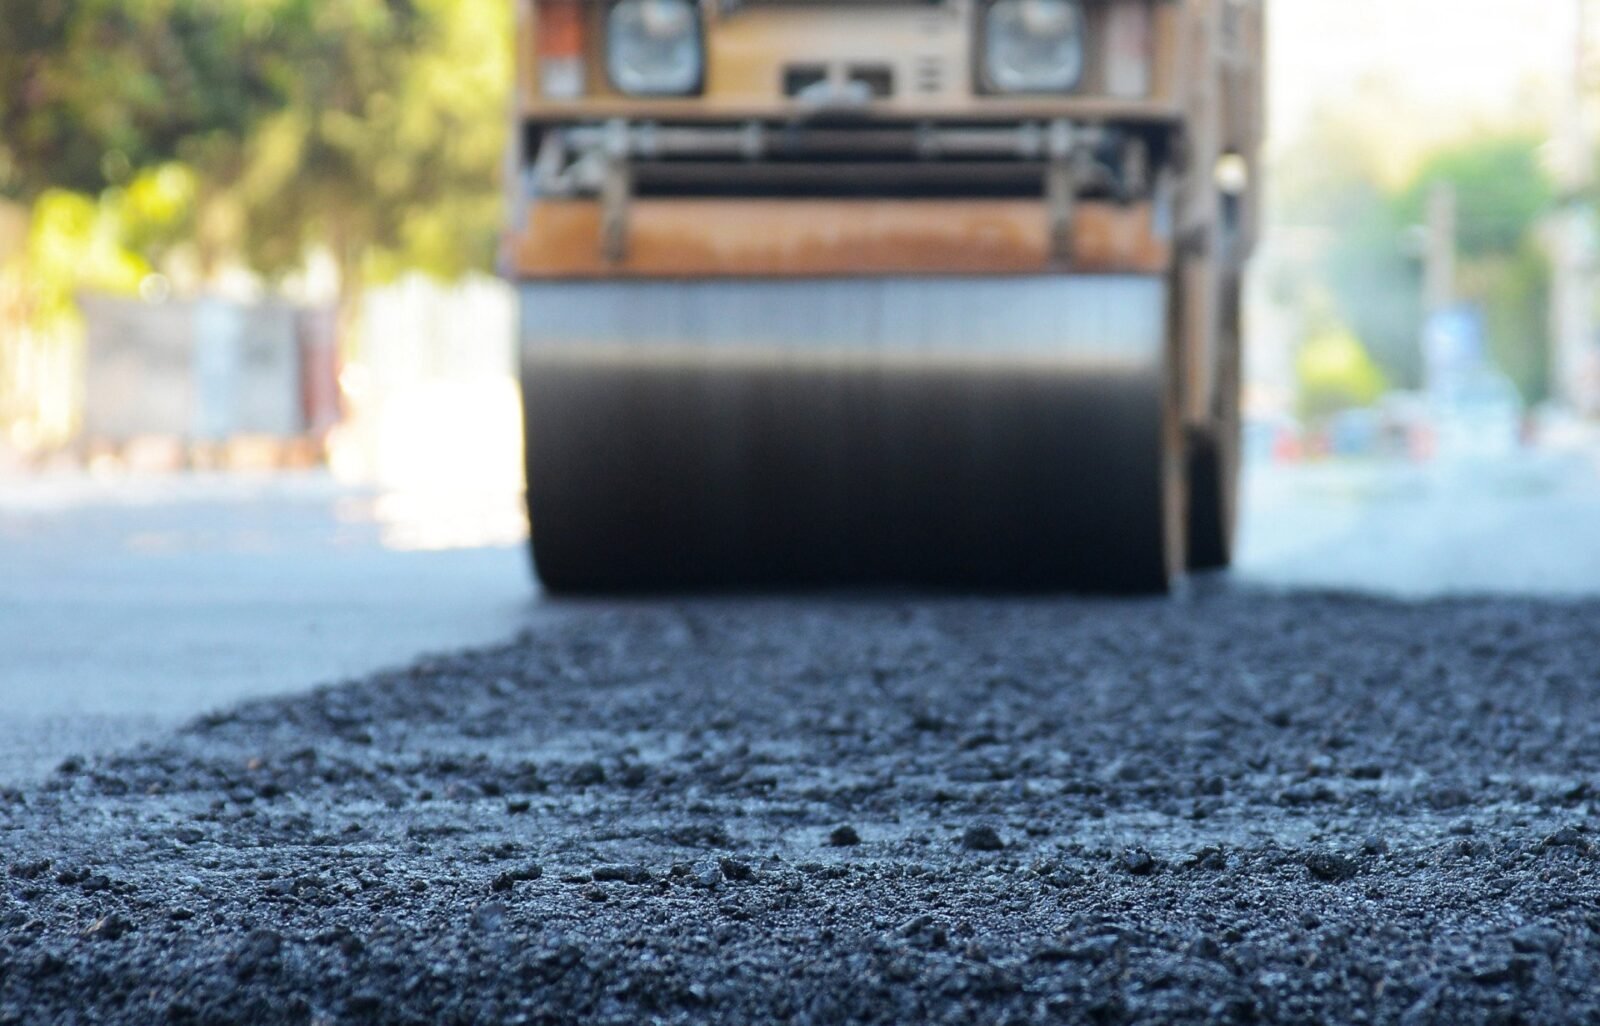 A road roller leveling out the new asphalt surface.